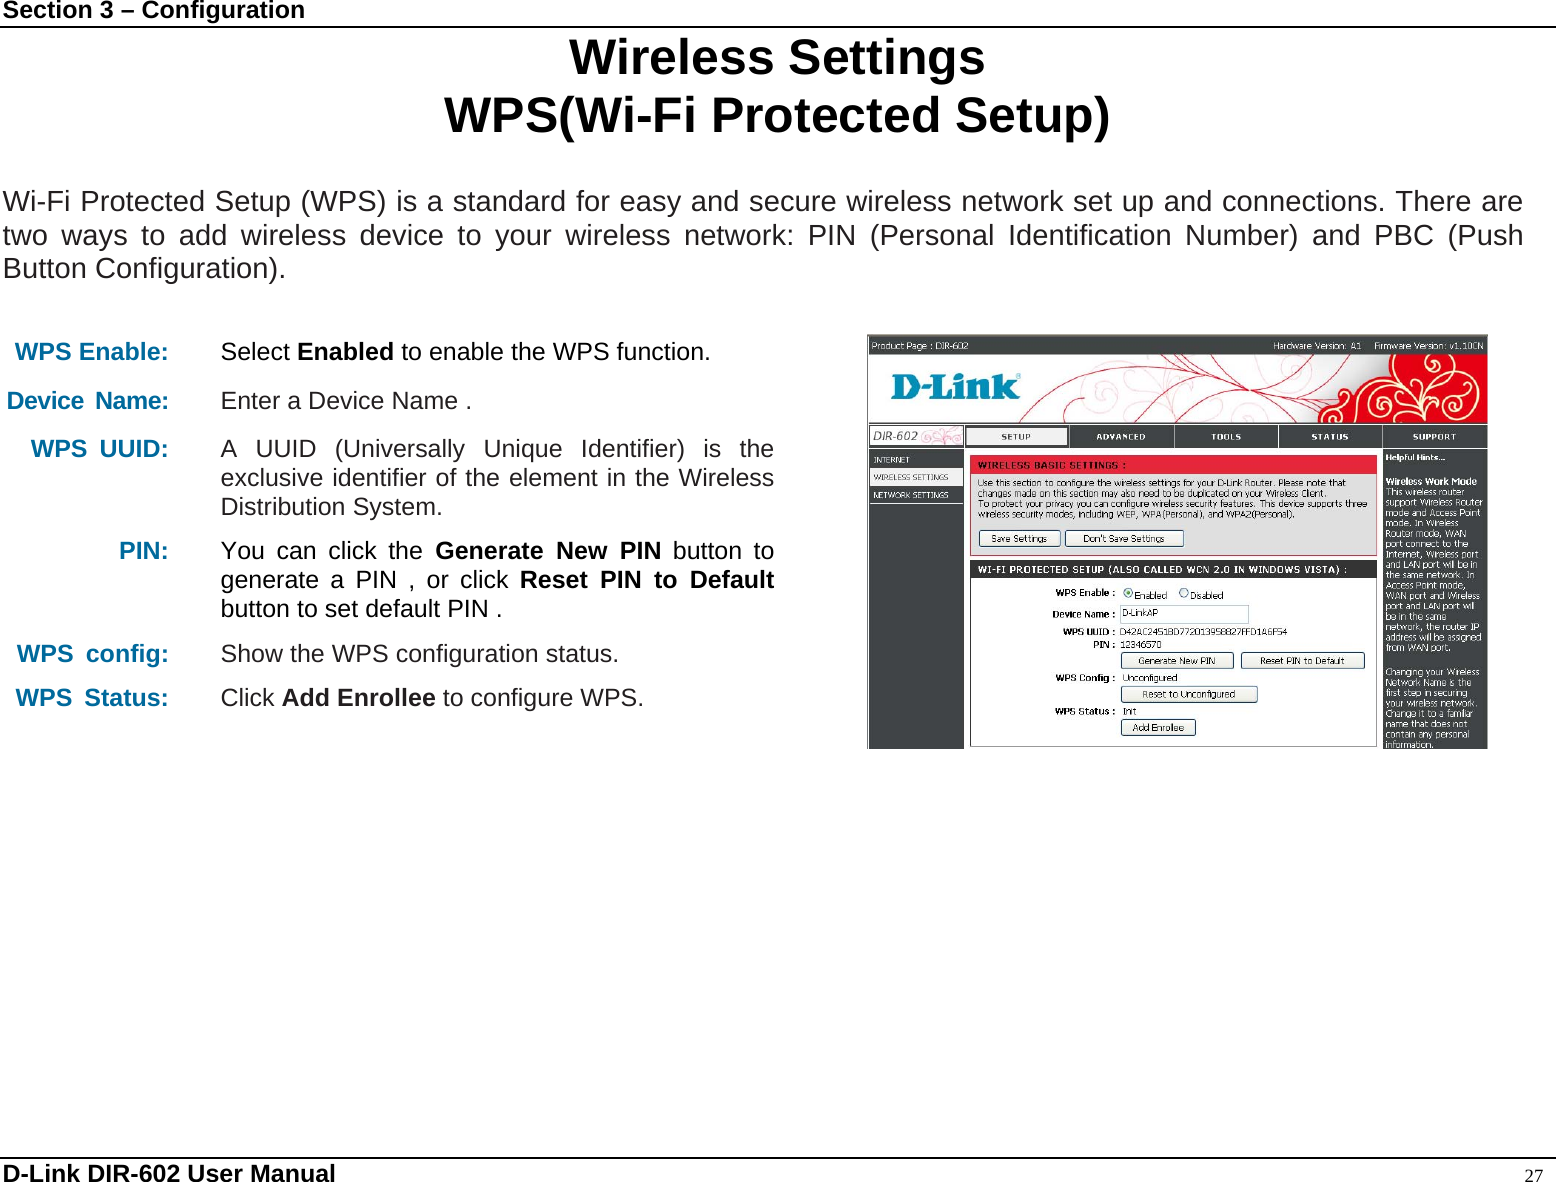 Section 3 – Configuration  Wireless Settings WPS(Wi-Fi Protected Setup)  Wi-Fi Protected Setup (WPS) is a standard for easy and secure wireless network set up and connections. There are two ways to add wireless device to your wireless network: PIN (Personal Identification Number) and PBC (Push Button Configuration).  WPS Enable: Select Enabled to enable the WPS function. Device Name: Enter a Device Name . WPS UUID: A UUID (Universally Unique Identifier) is the exclusive identifier of the element in the Wireless Distribution System. PIN: You can click the Generate New PIN button to generate a PIN , or click Reset PIN to Default button to set default PIN . WPS config:  Show the WPS configuration status.  WPS Status: Click Add Enrollee to configure WPS.   D-Link DIR-602 User Manual                                                                                               27 